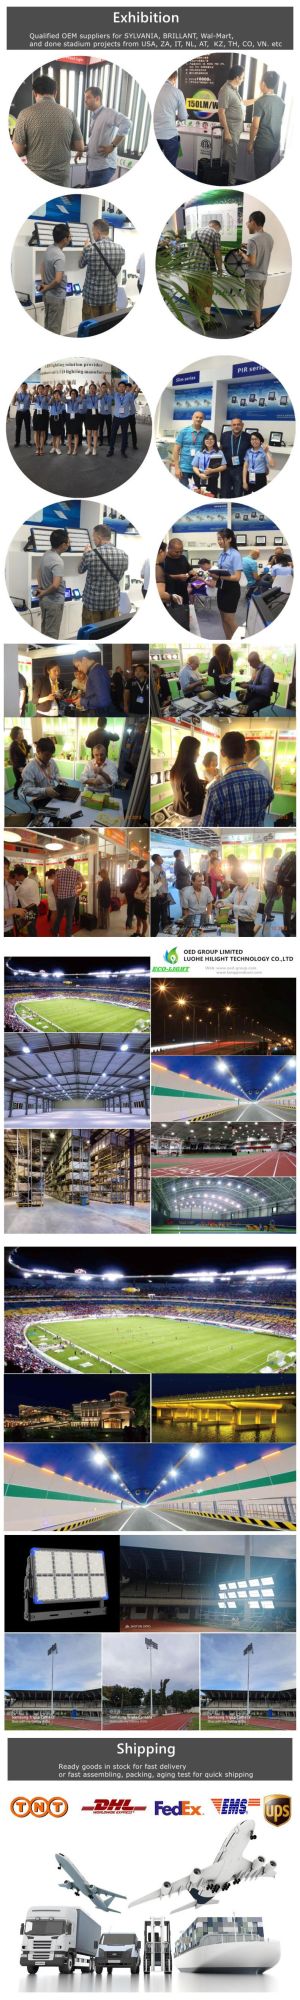 Black House Sports Factory Stadium 100W 170lm/W Outdoor Lighting for Landscape